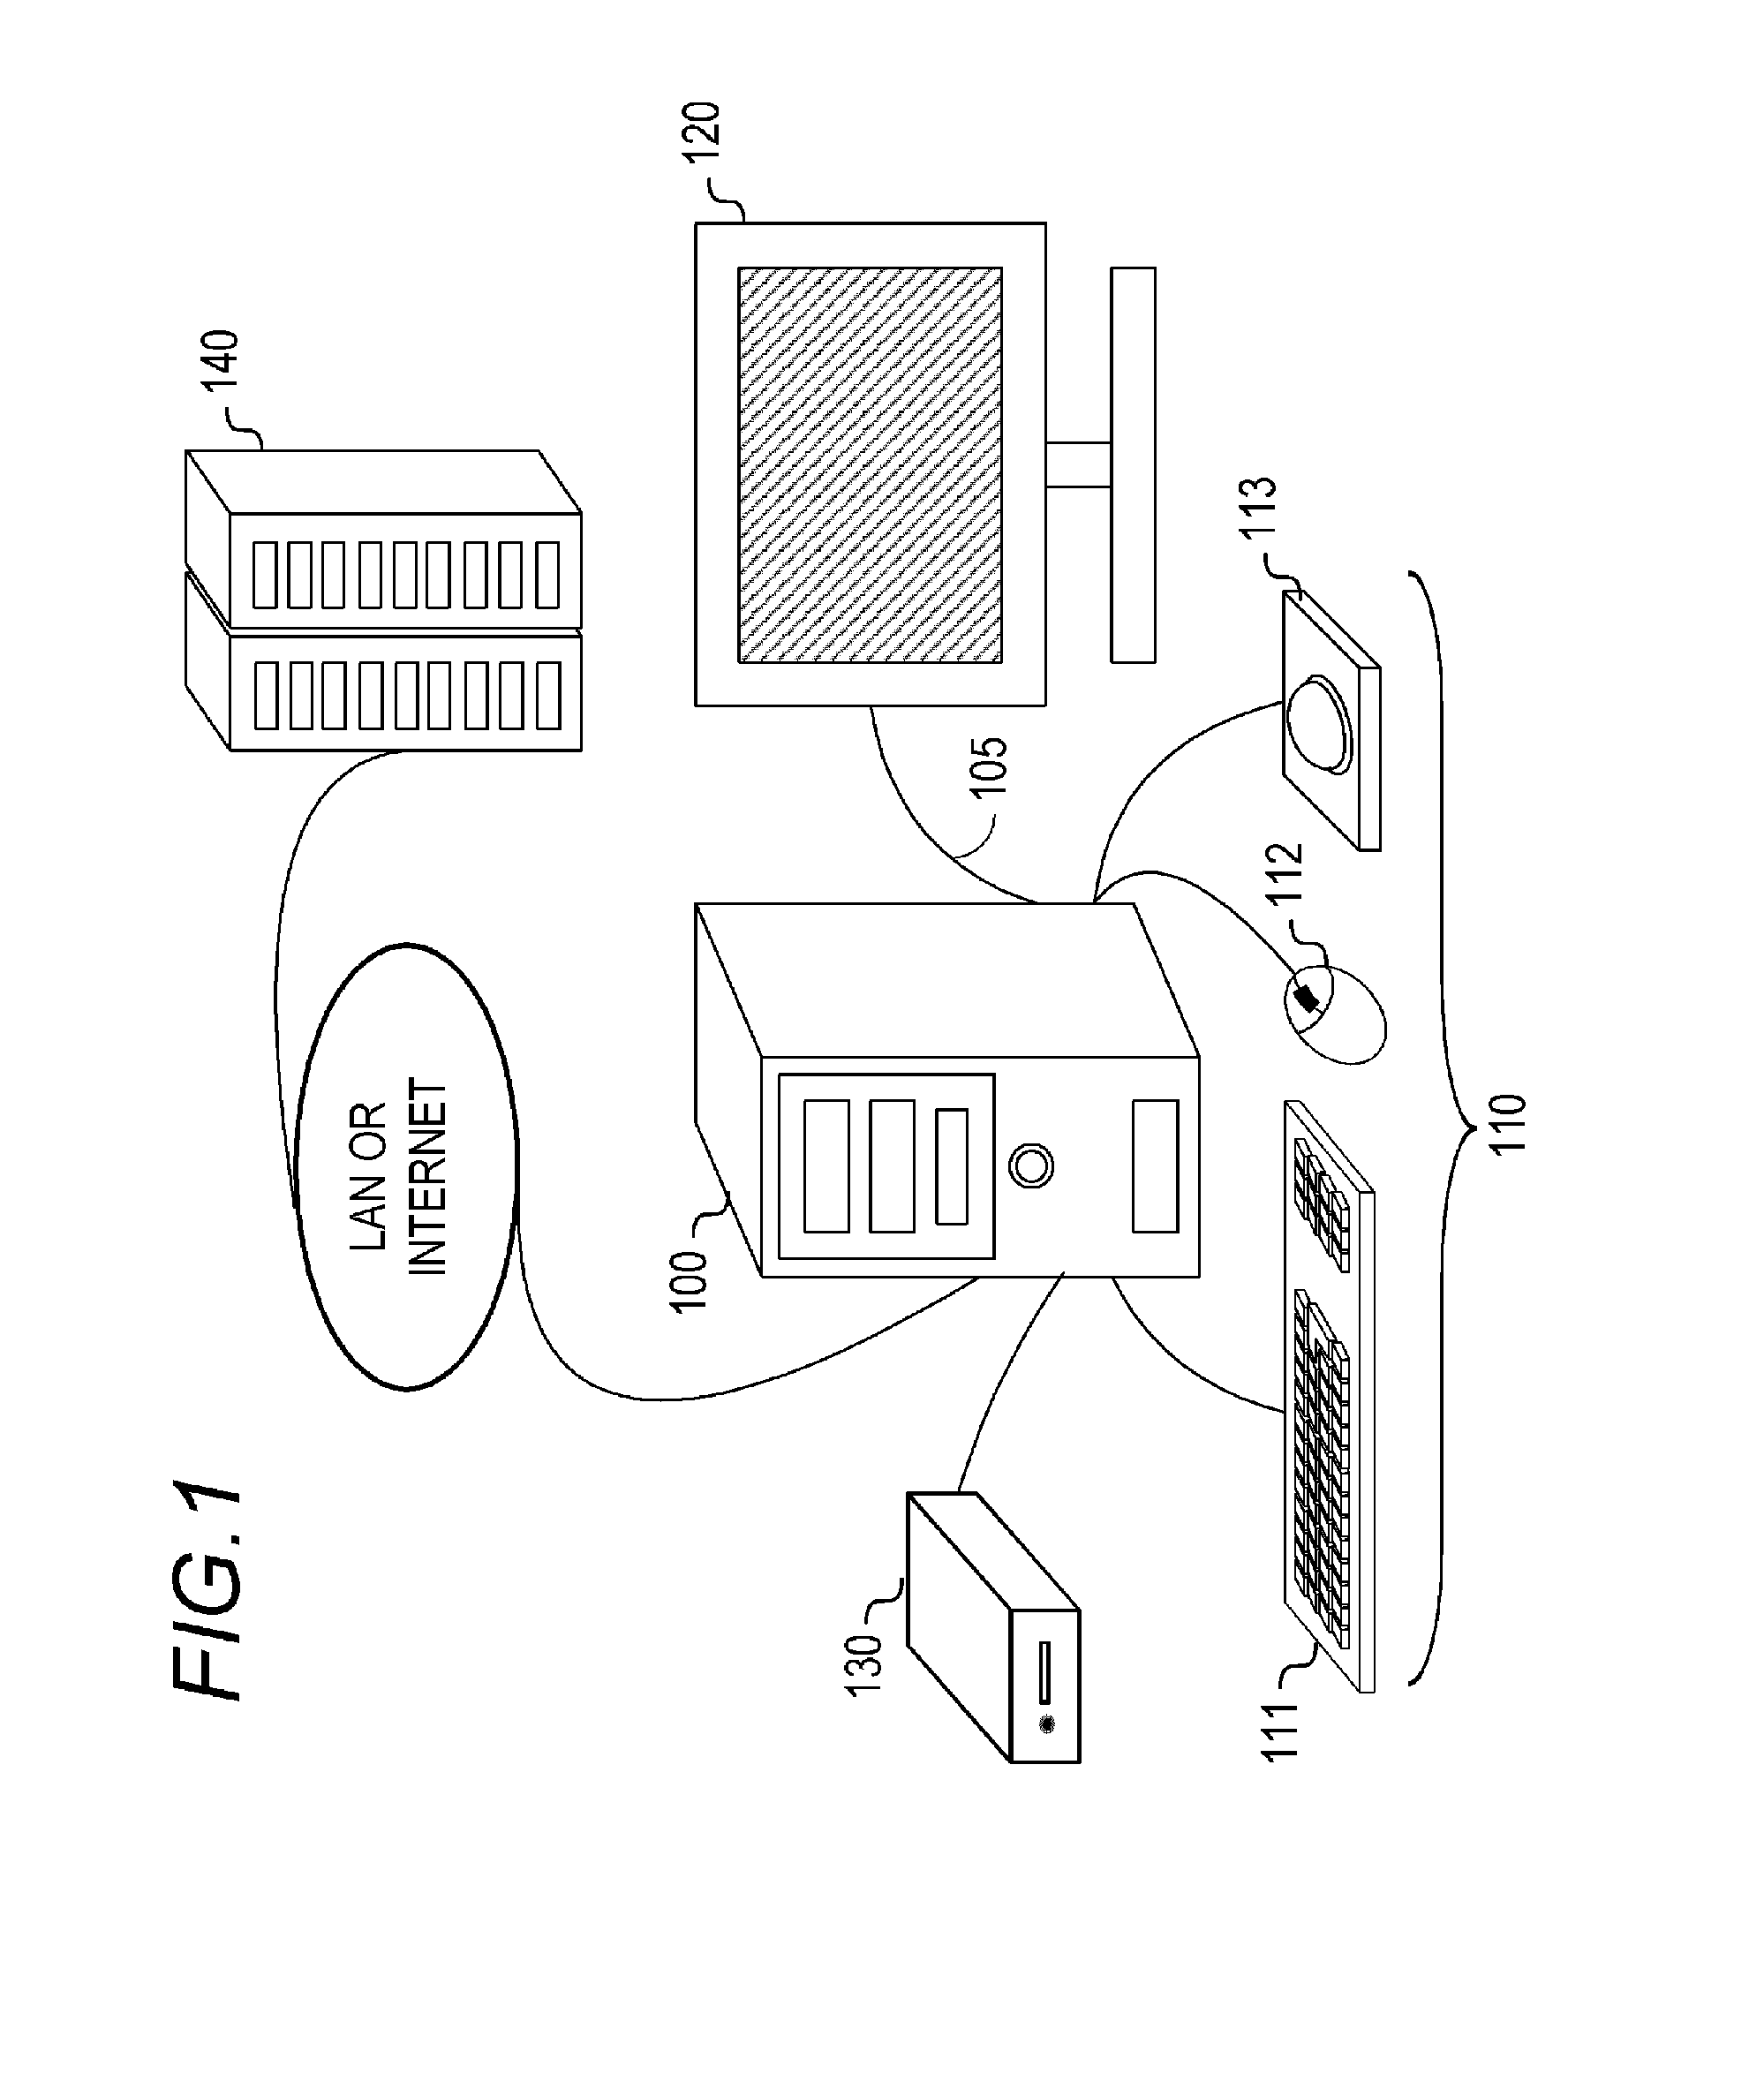 Image generating apparatus and method for controlling the same